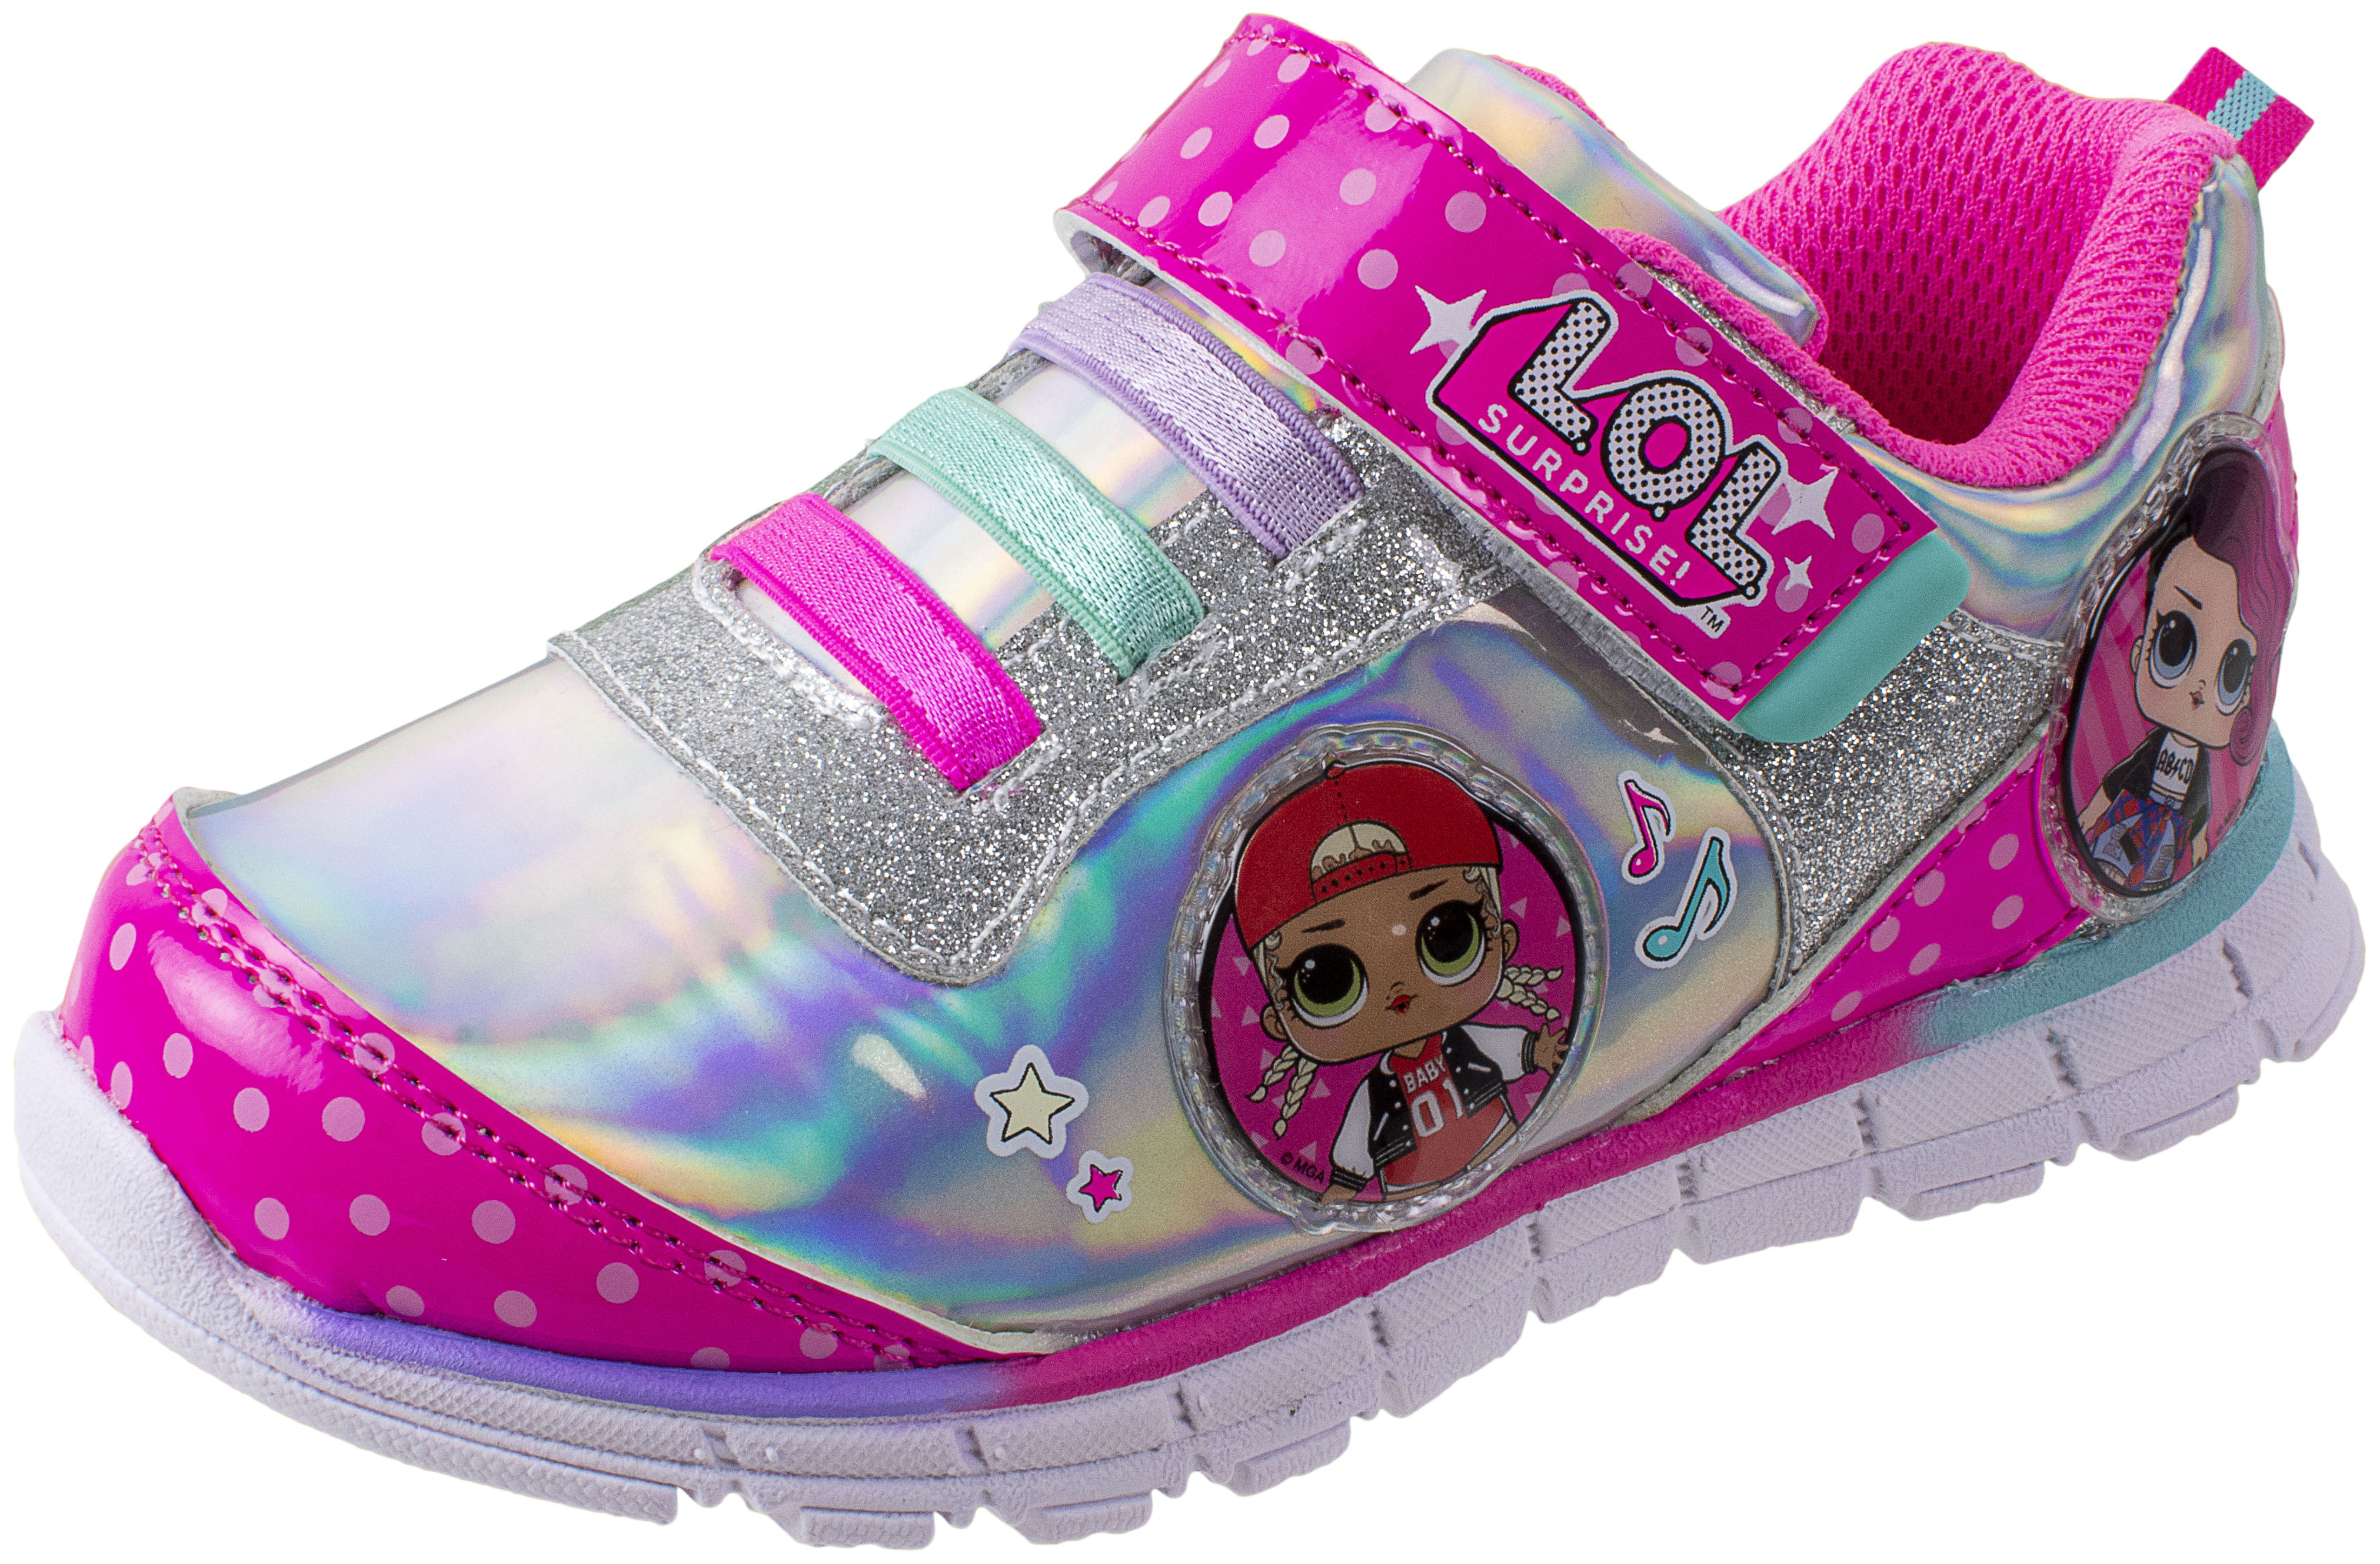 lol shoes for girls